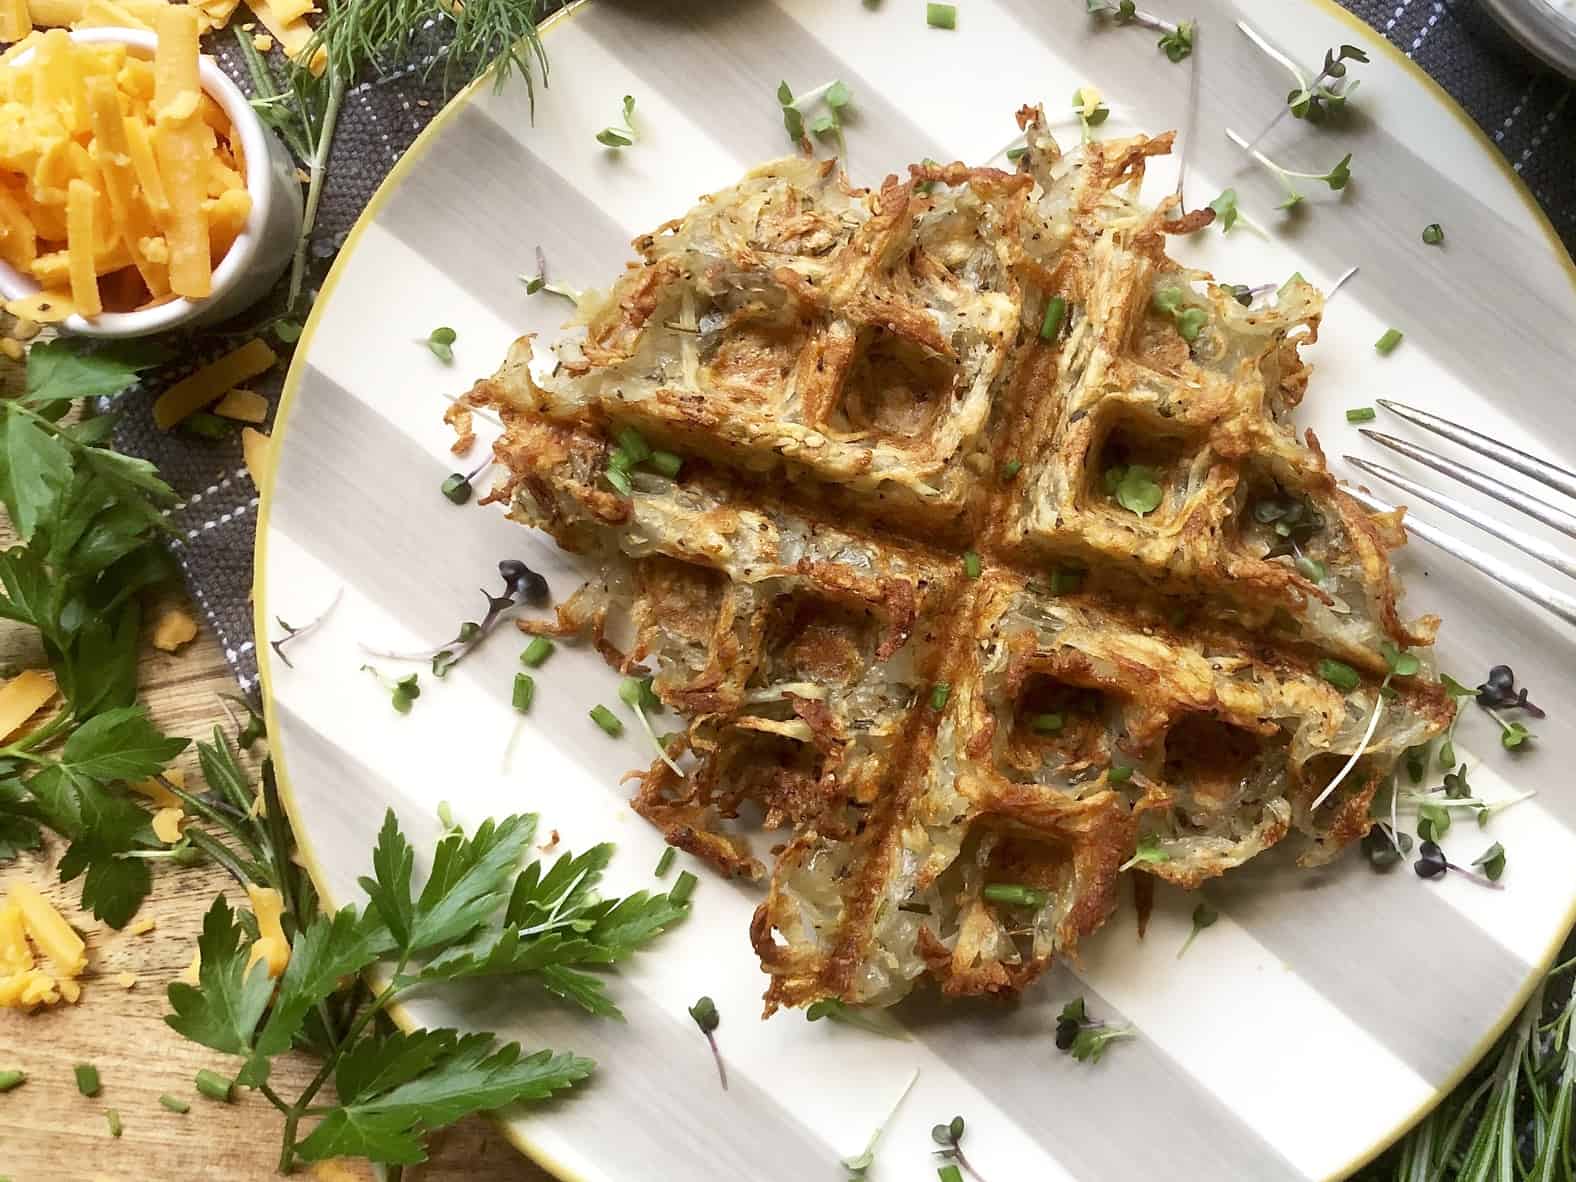 waffled hash browns with rosemary - a hint of rosemary